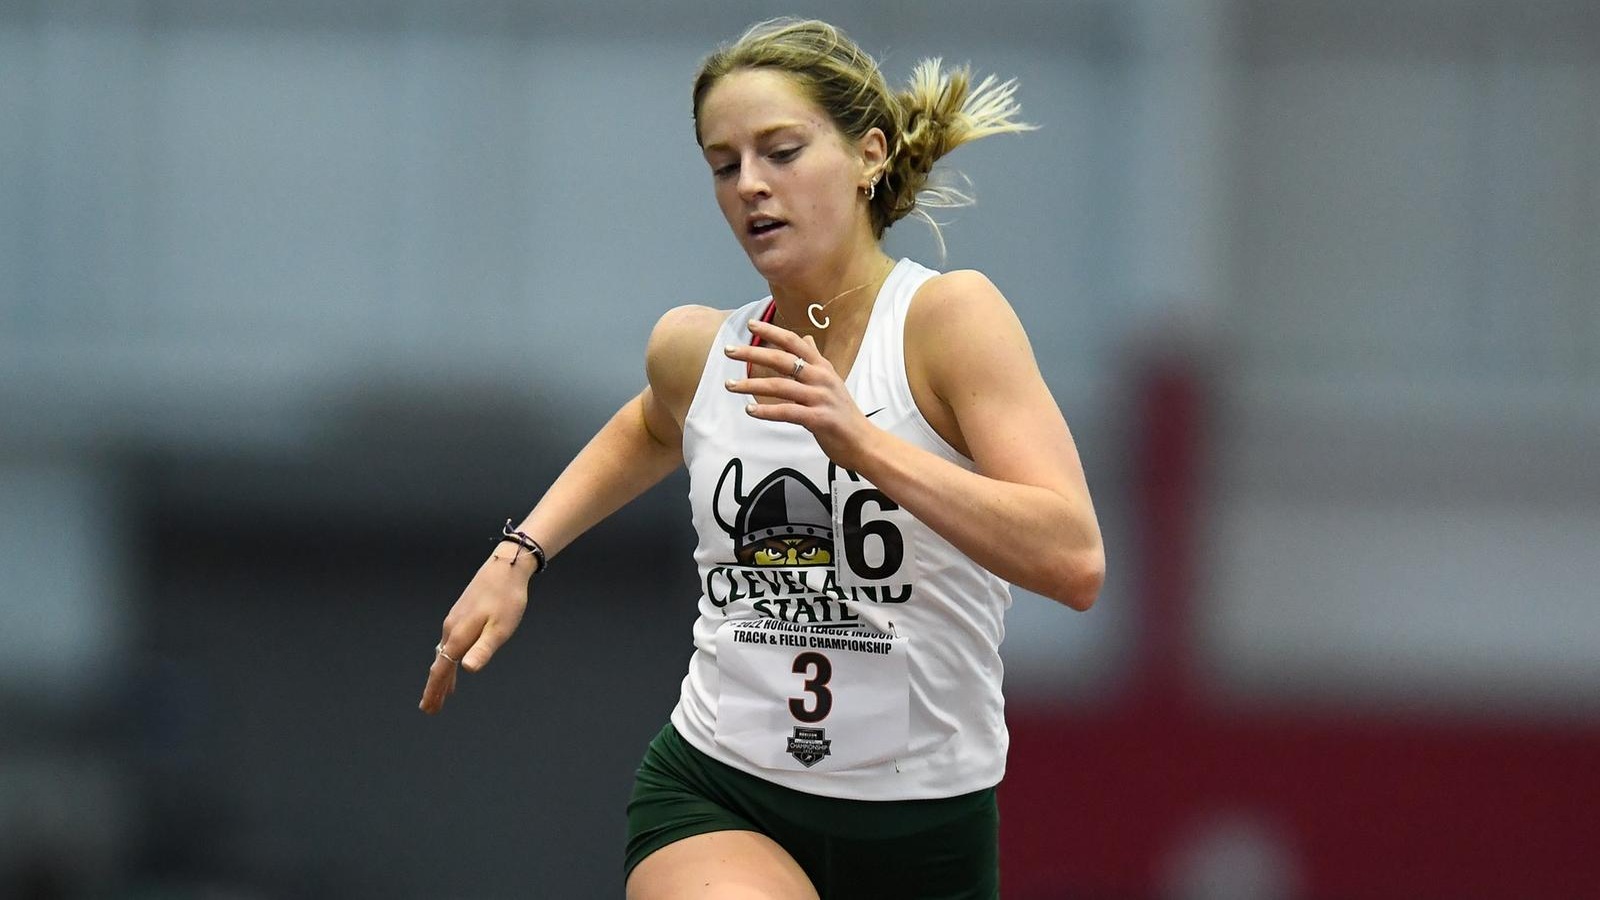 Cleveland State Track & Field Has Strong Showing At Oliver Nicoloff Invite